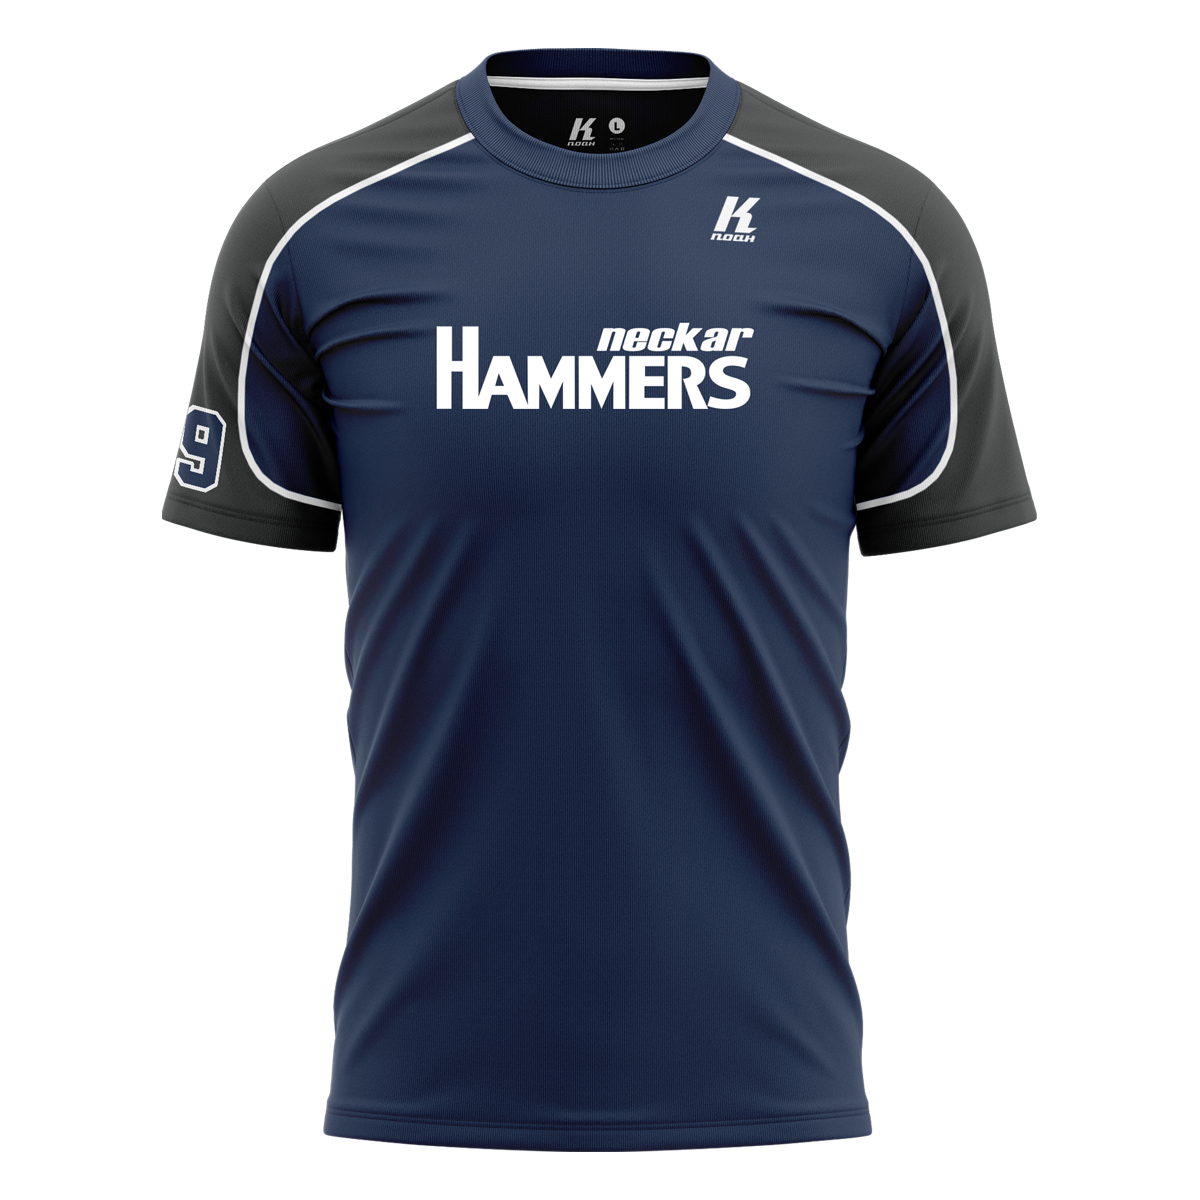 Hammers Signature Series Tee "Calgary" with Playernumber or Initials